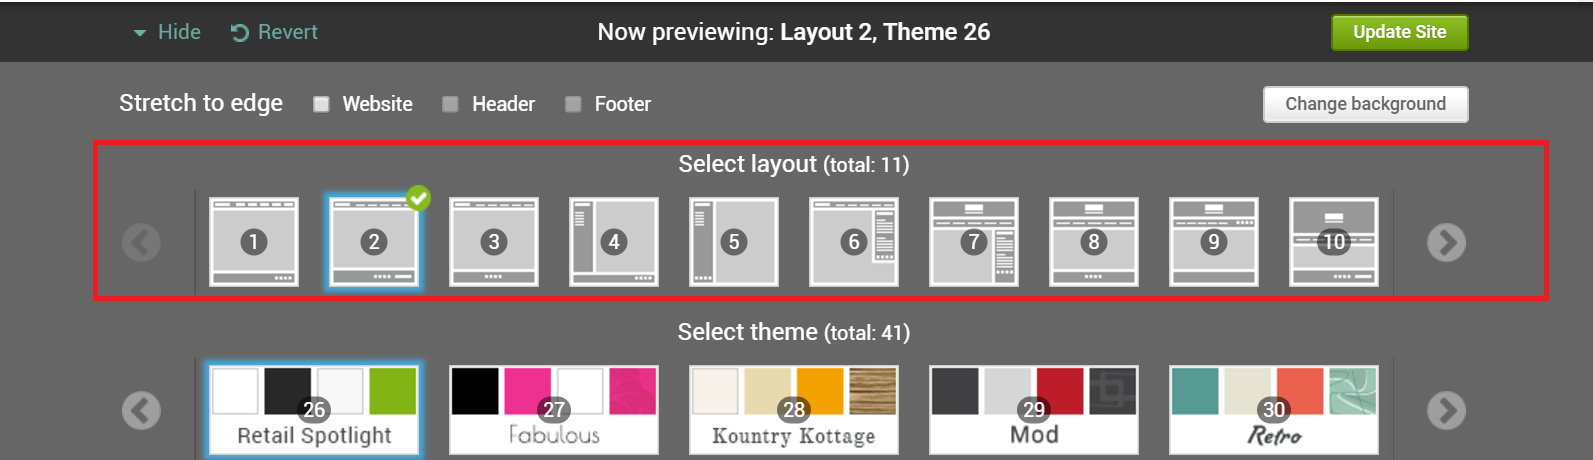 select-layout-new-1.png